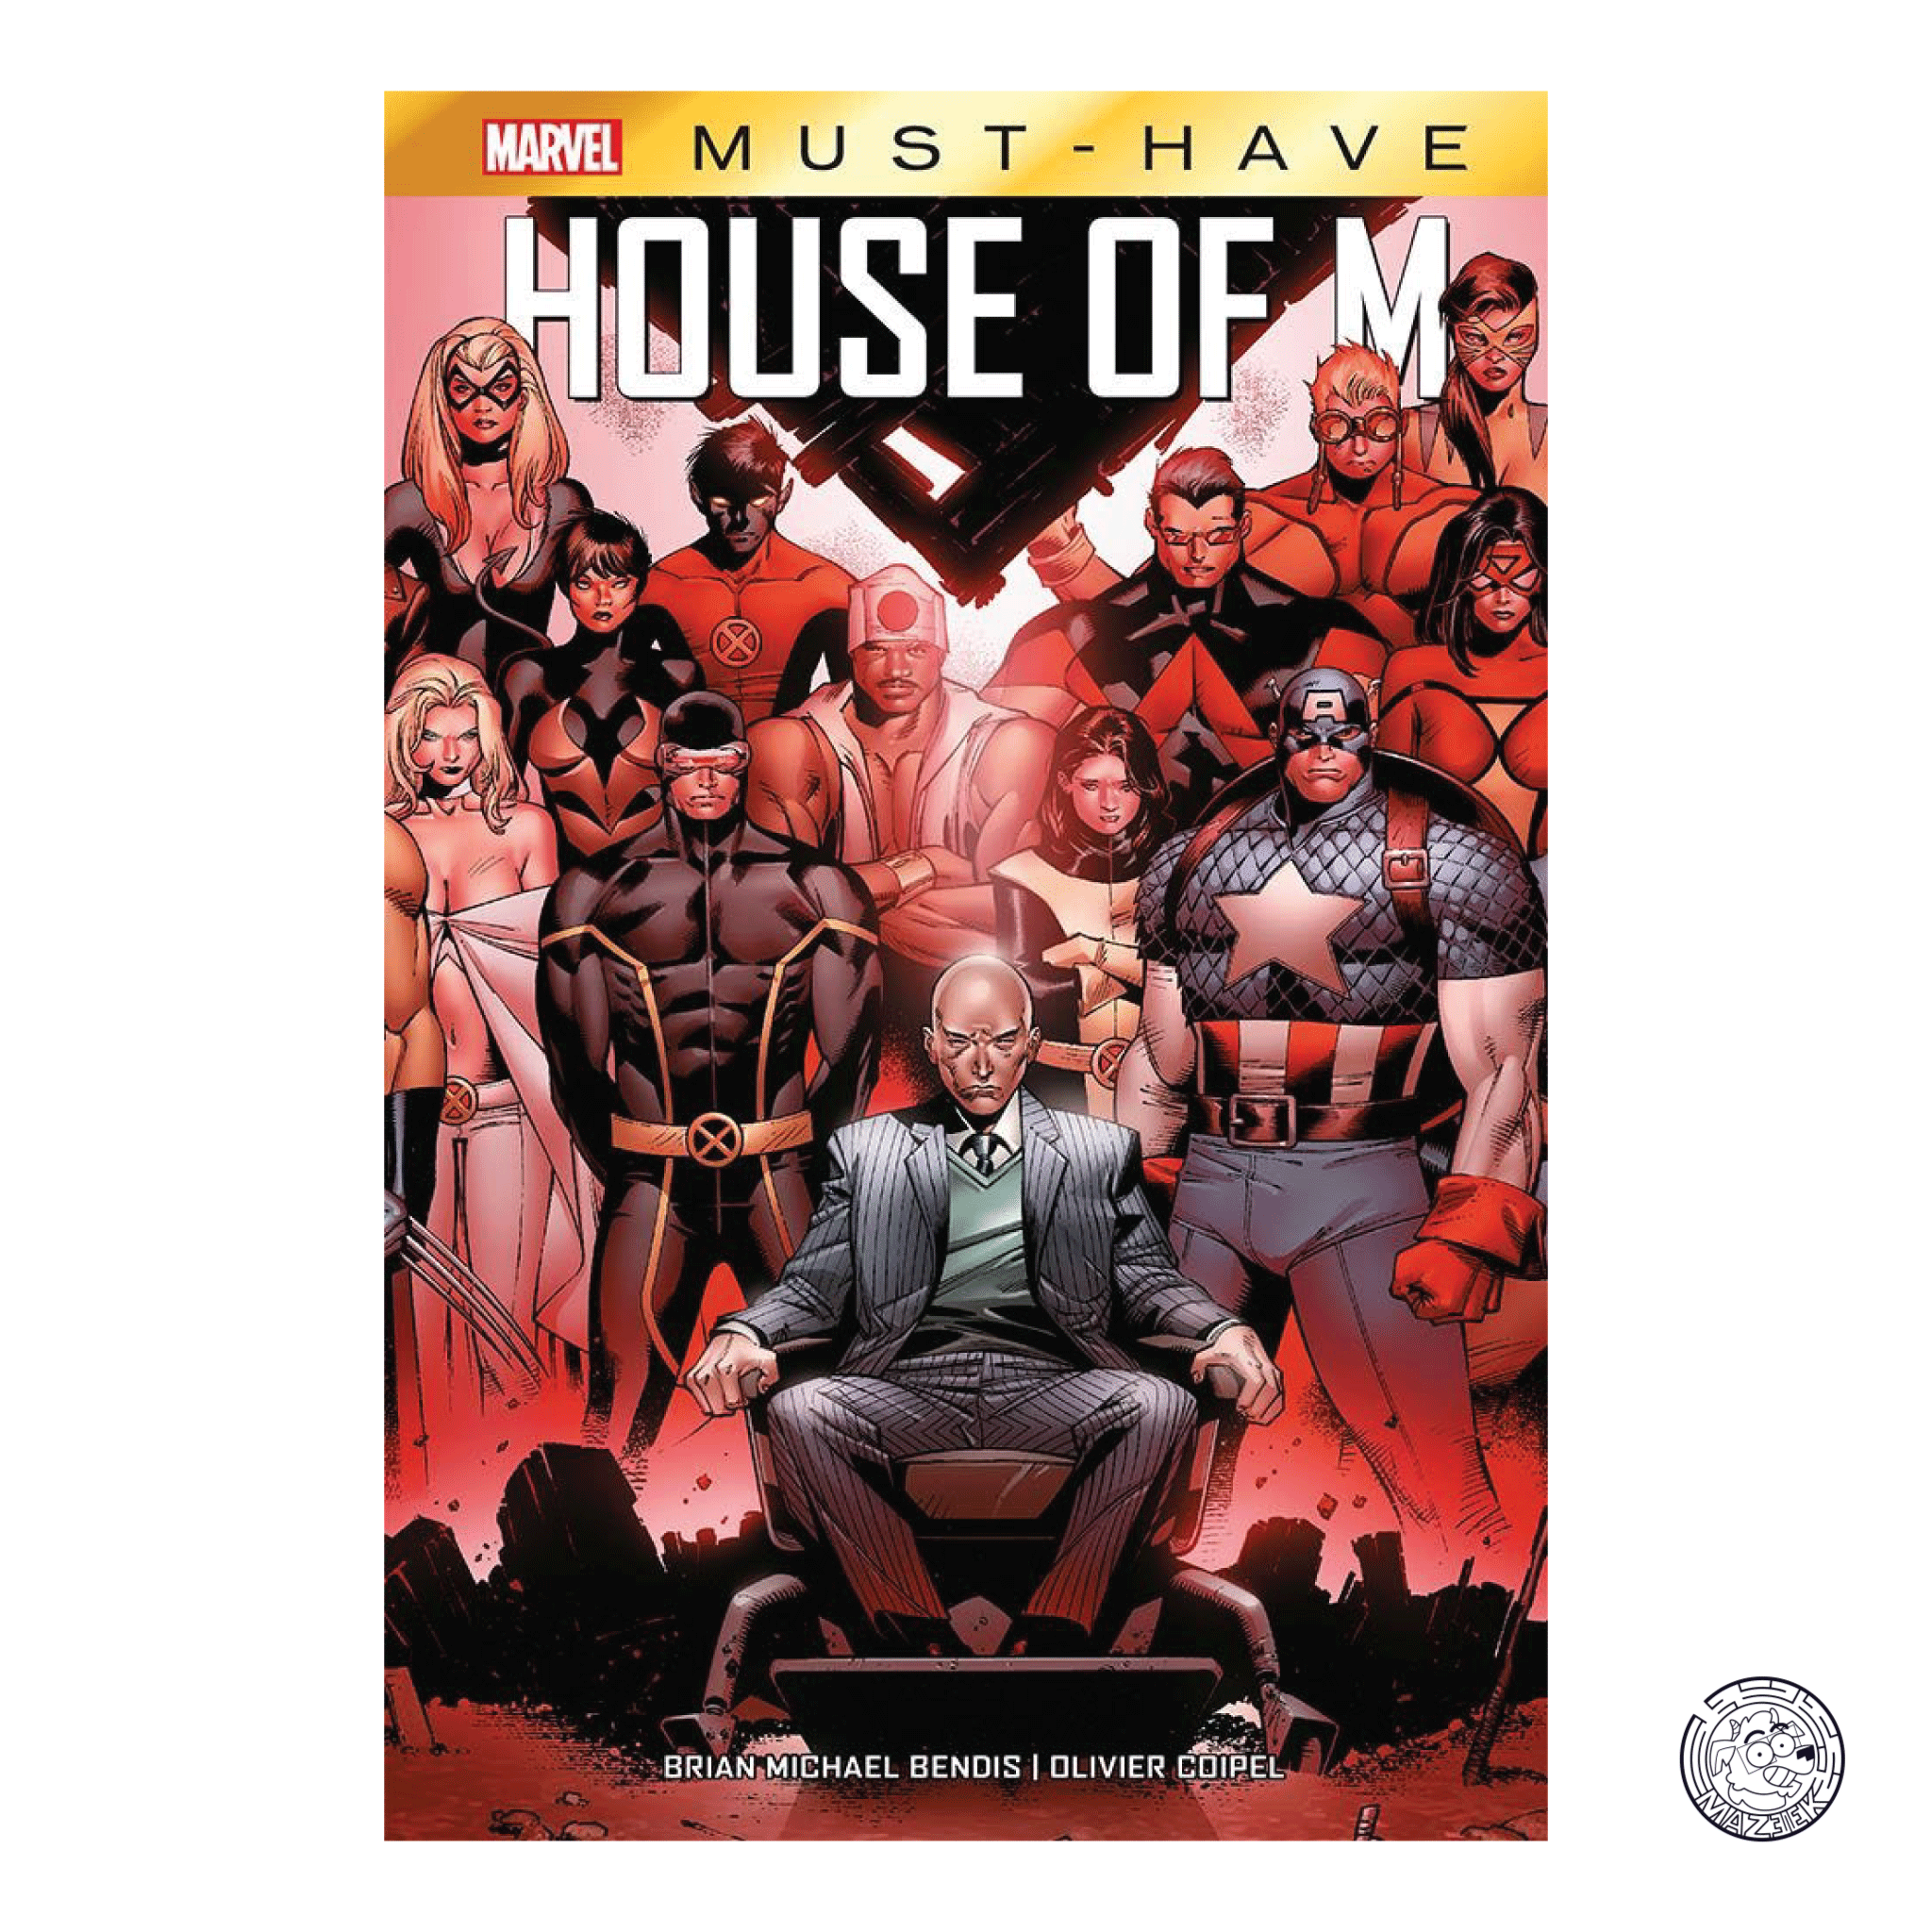 Marvel Must Have - House of M